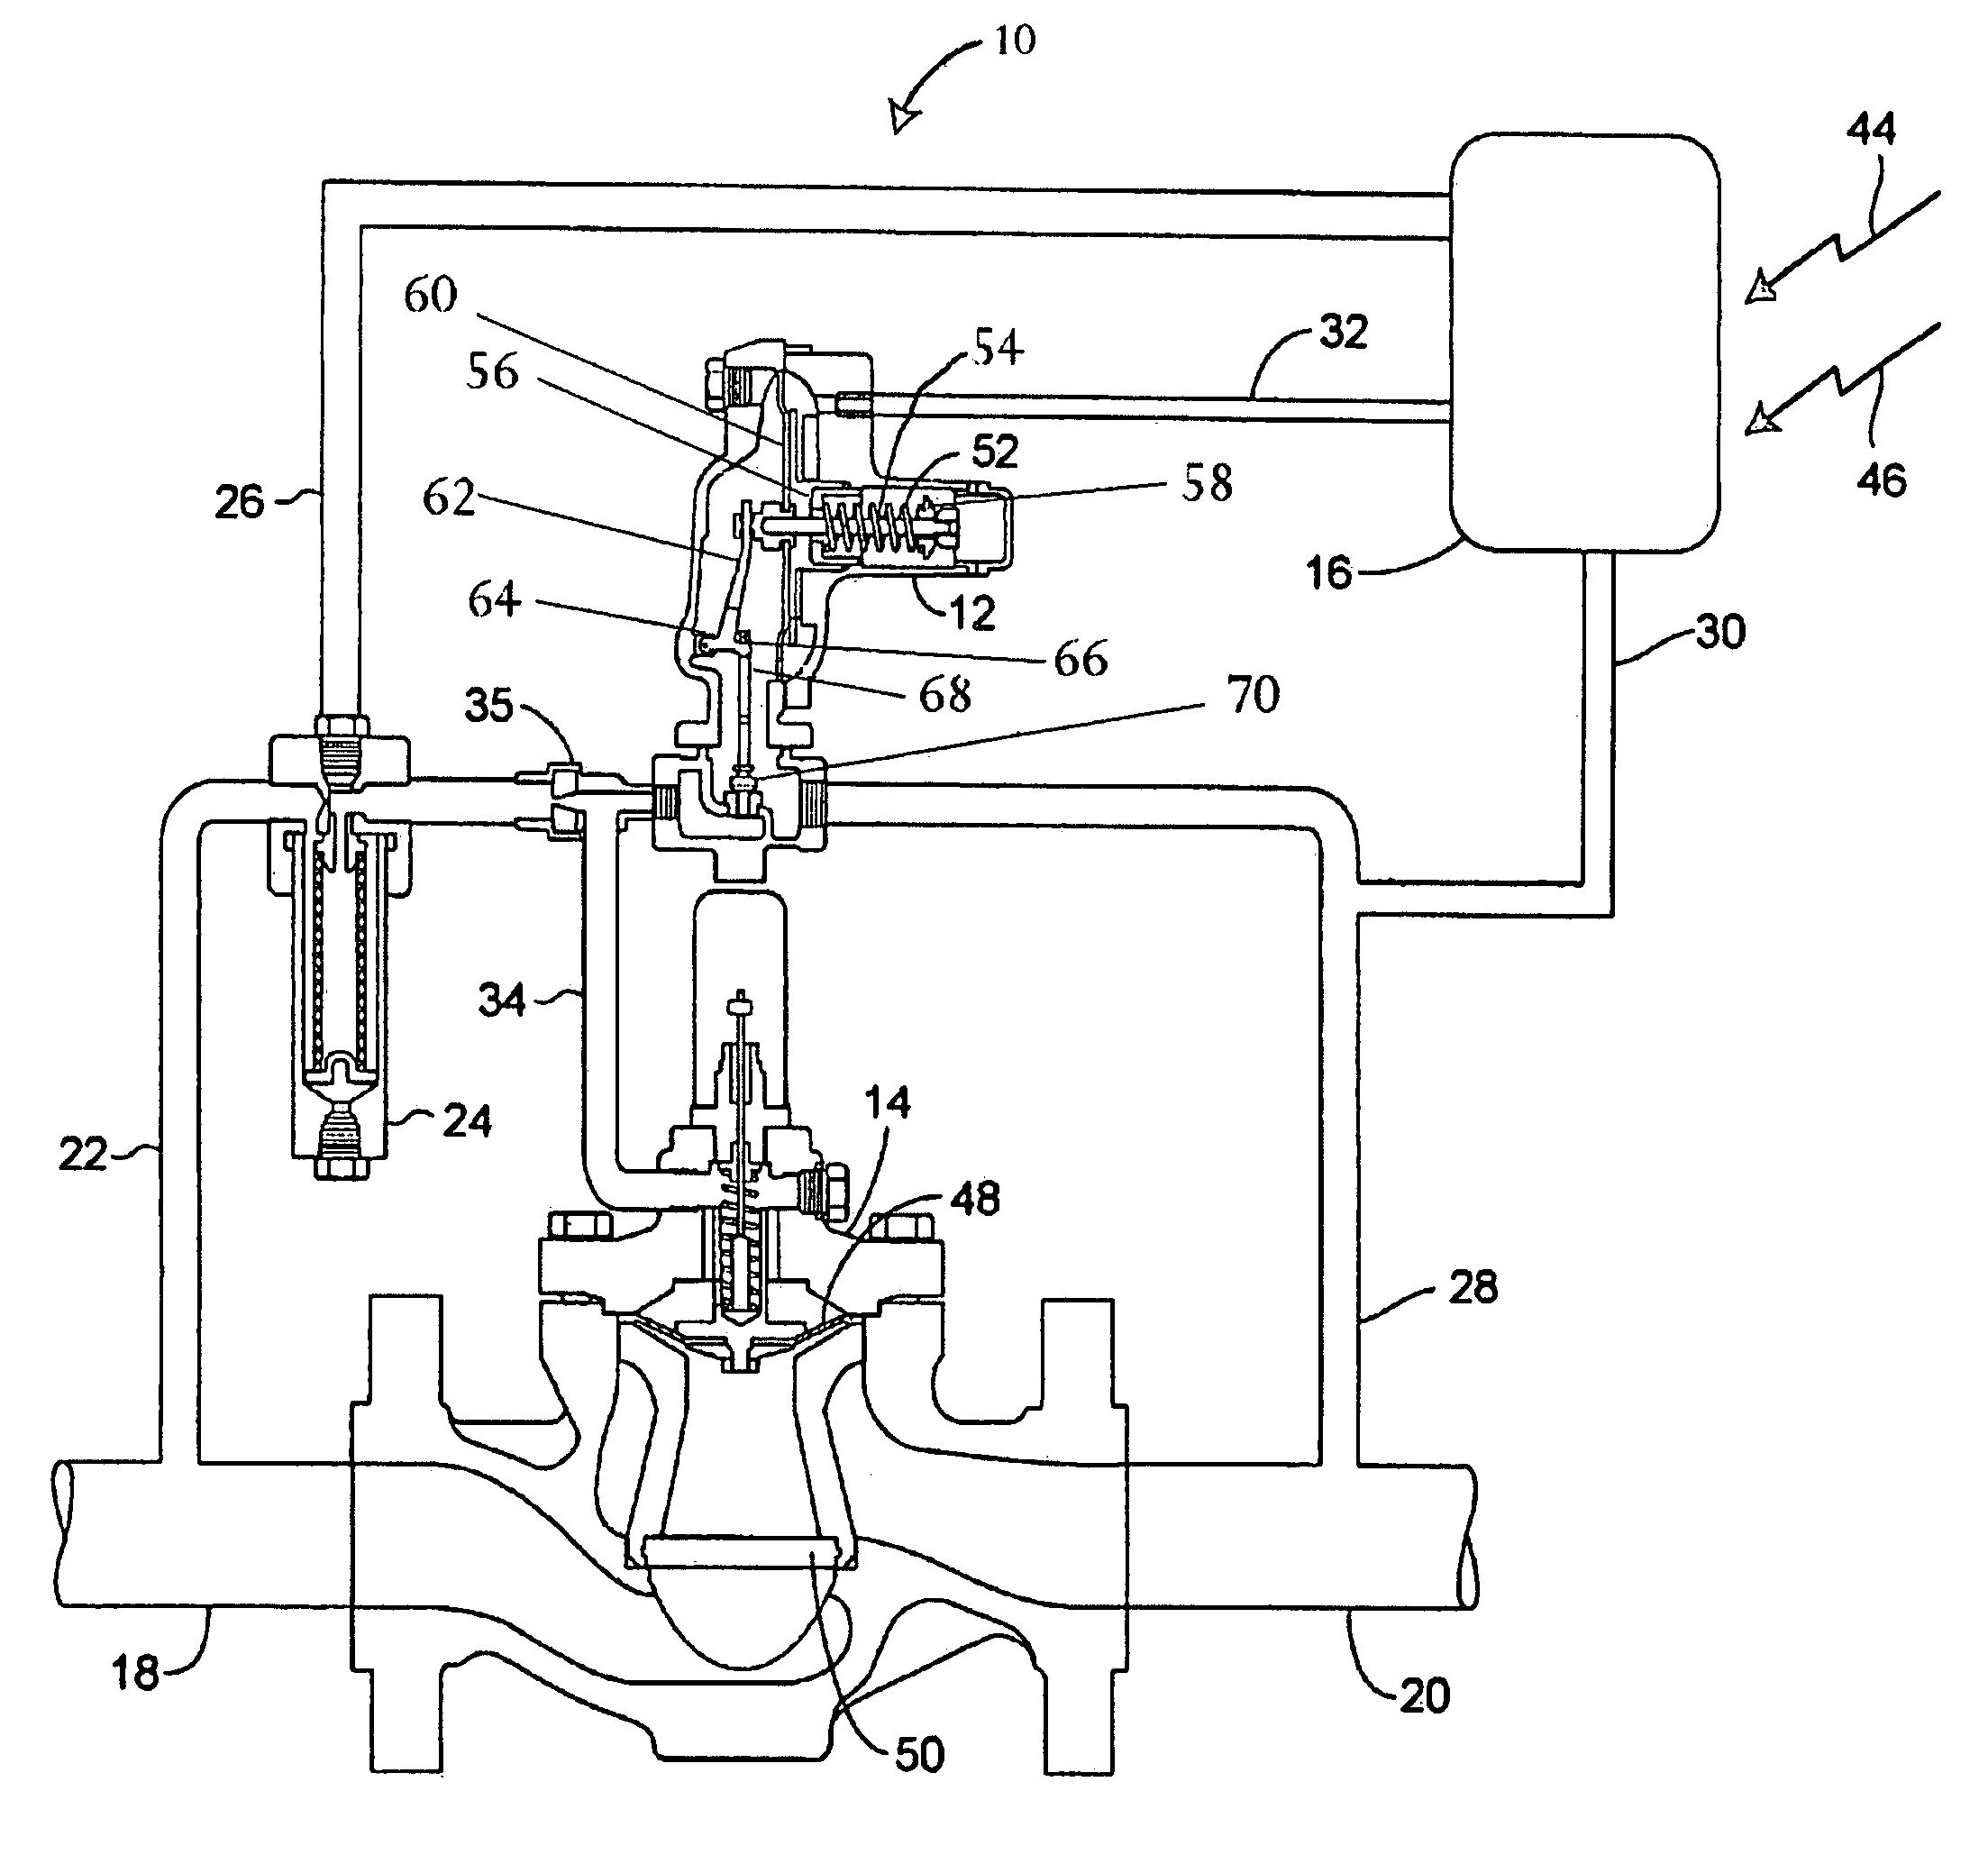 Pressure loaded pilot system and method for a regulator without atmospheric bleed